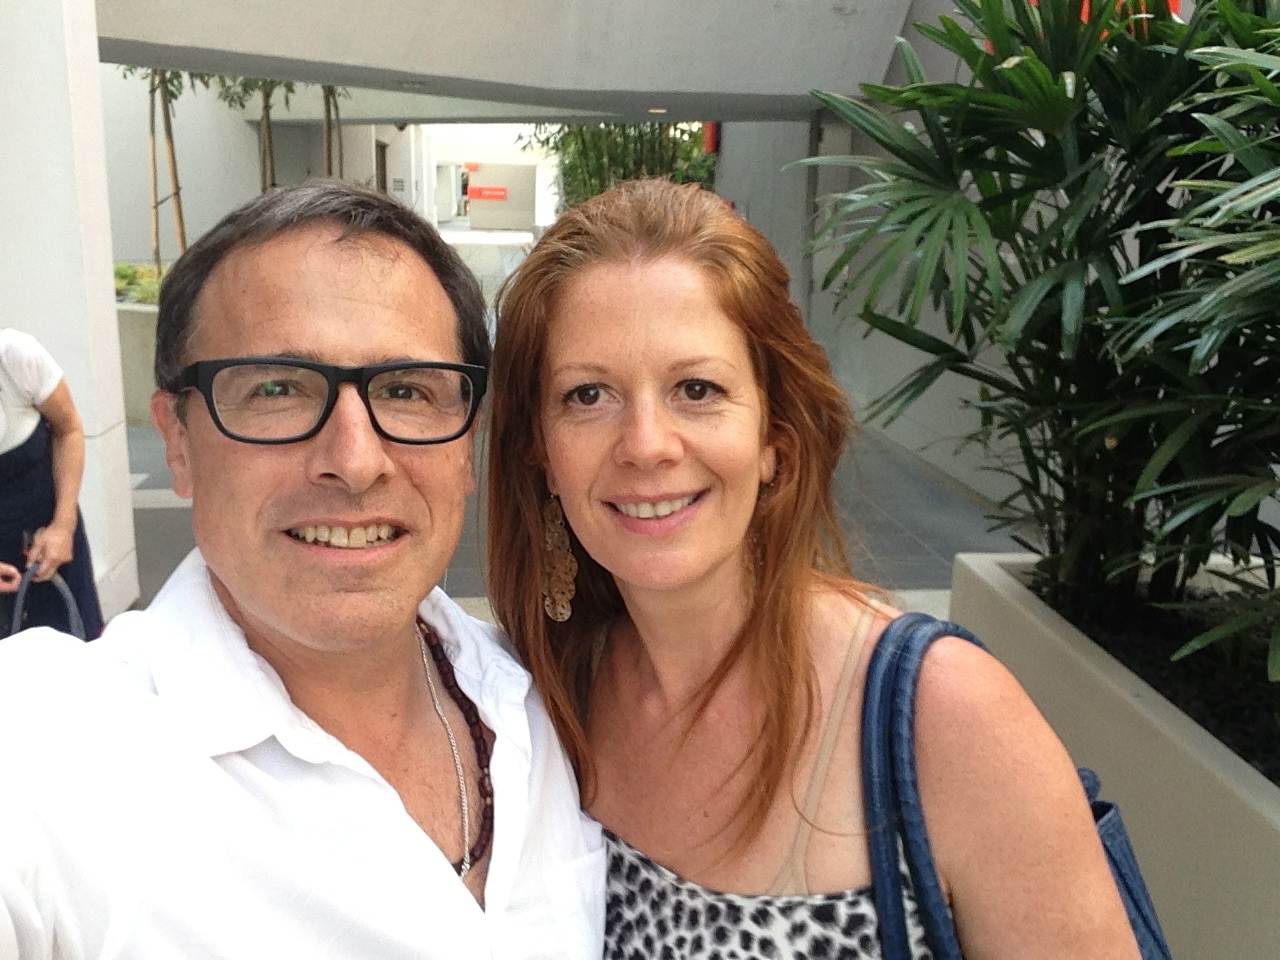 David O Russell with Jennifer Howard-Kessler on location in LA for the Balance Documentary Shoot, July 2013